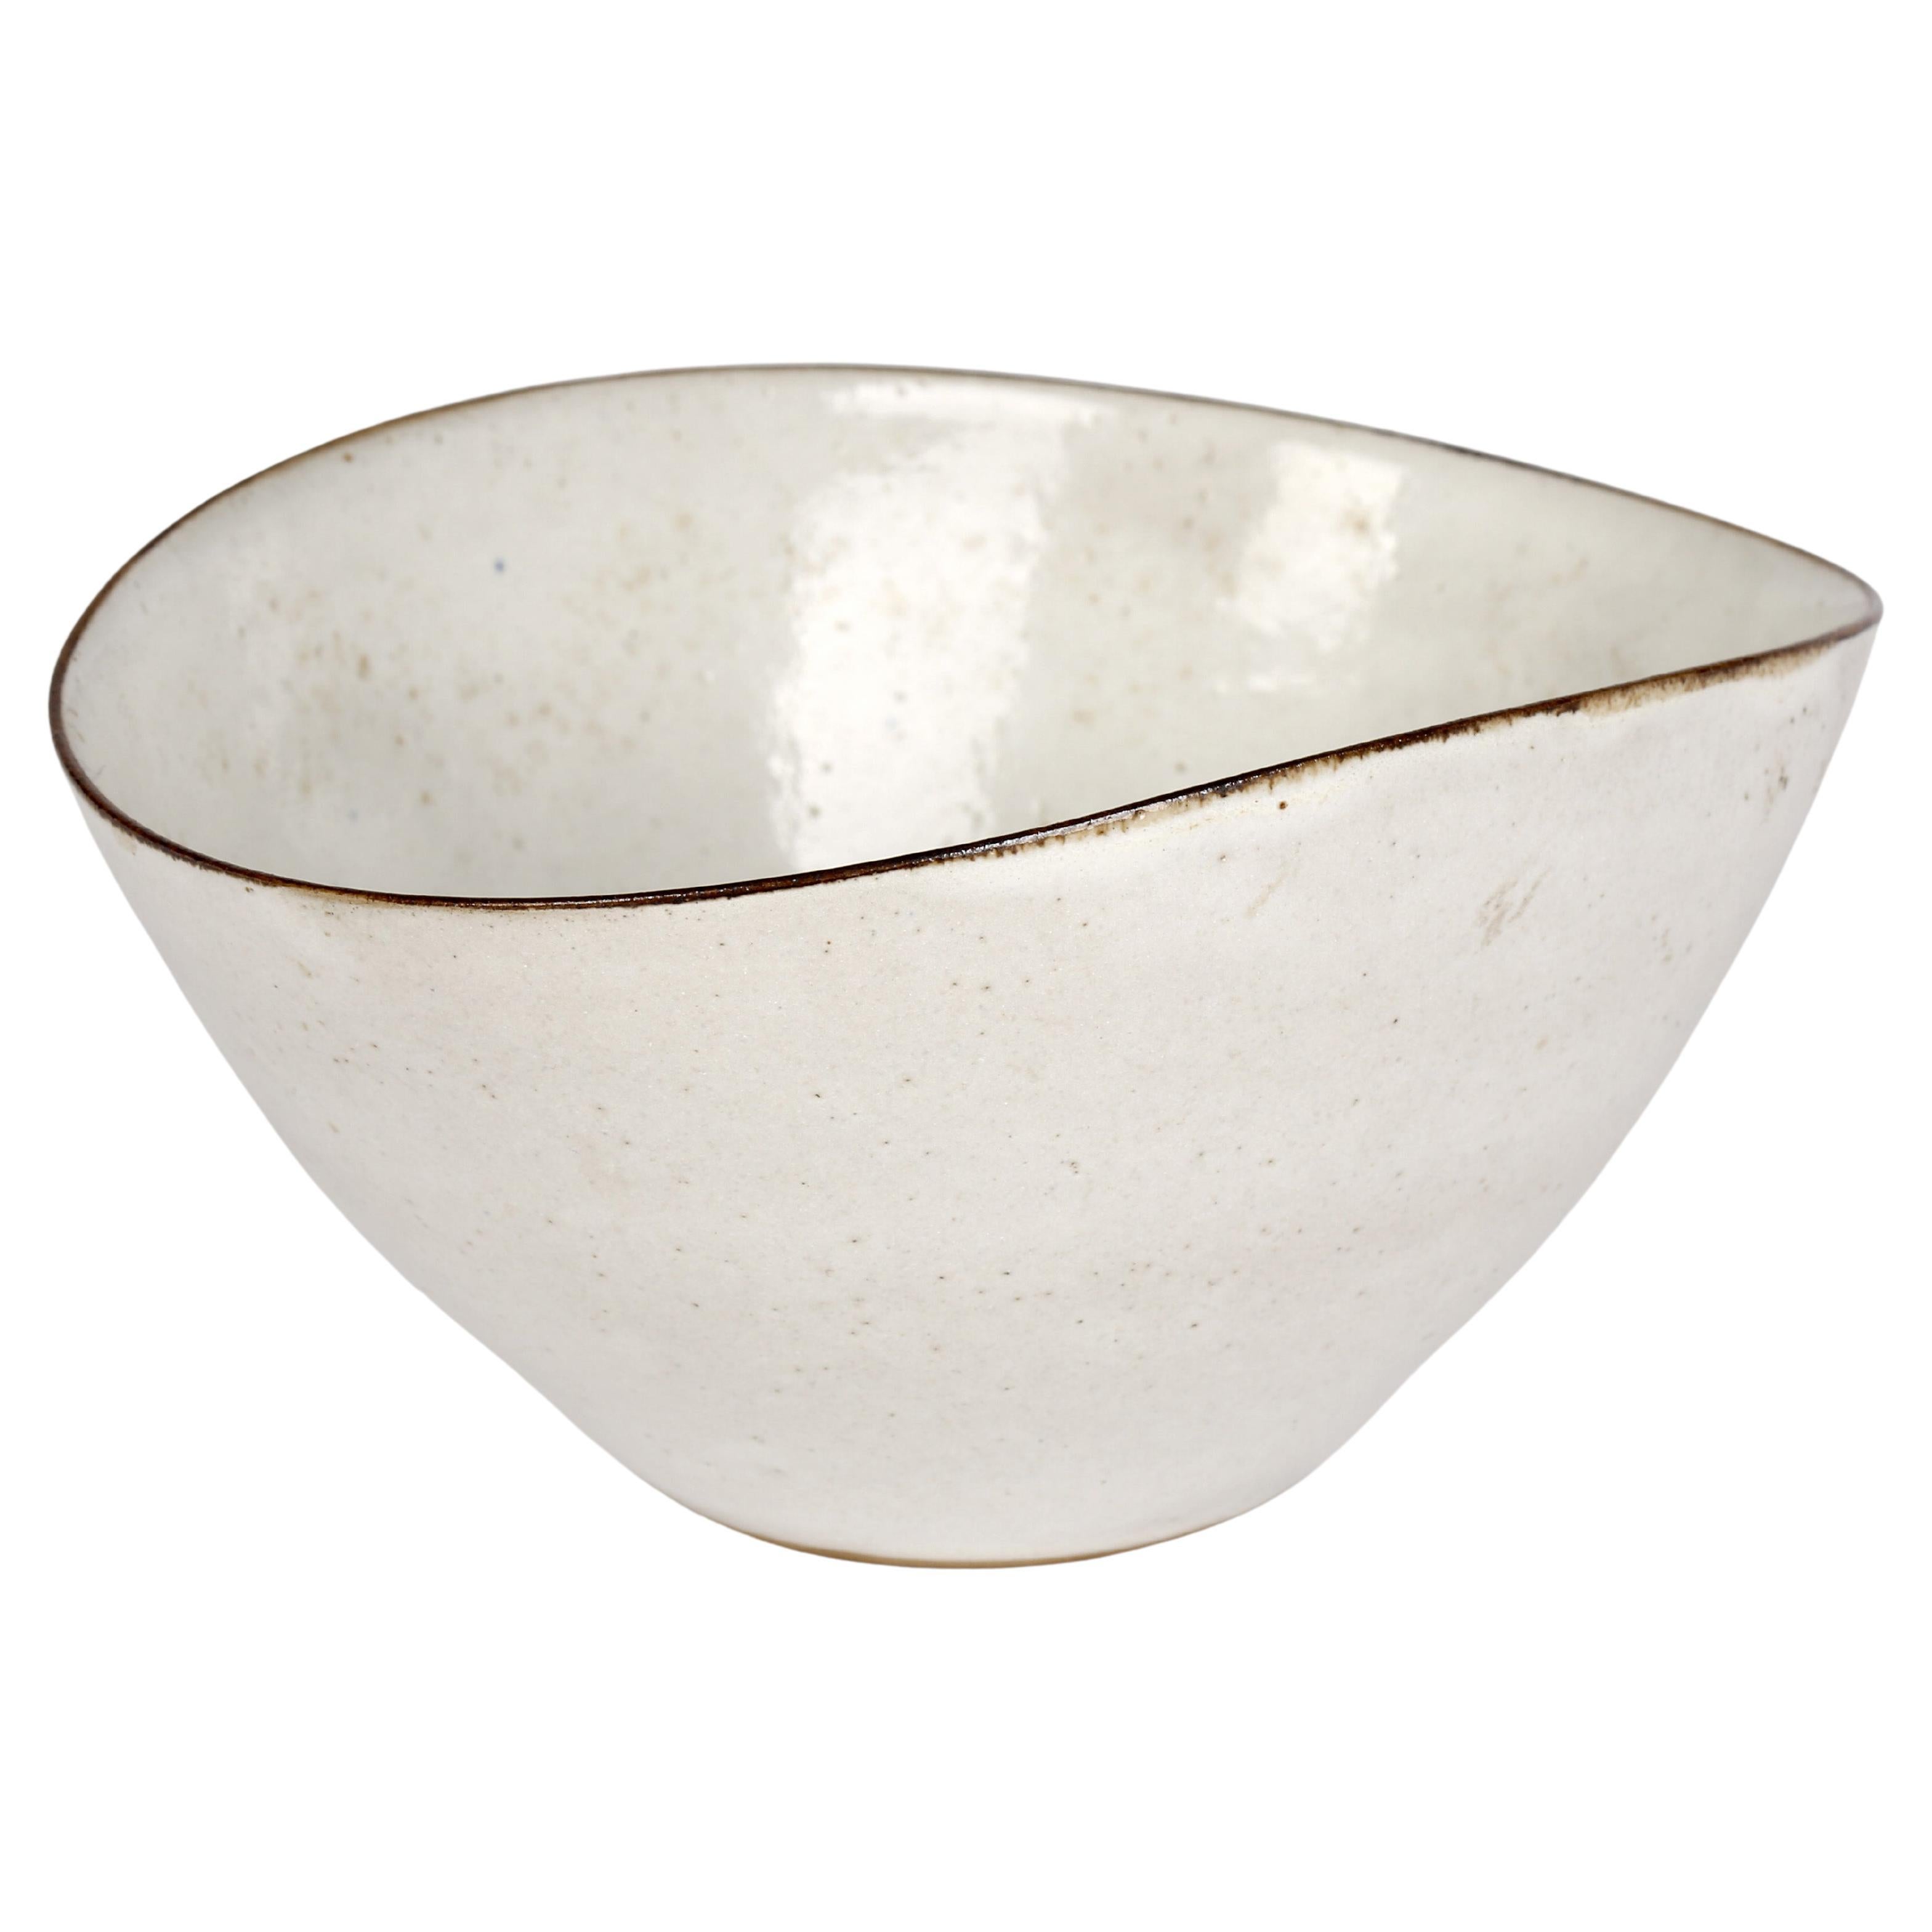 Lucie Rie 'Austrian/British, 1902-1995' Squeezed Oatmeal Glazed Pottery Bowl For Sale